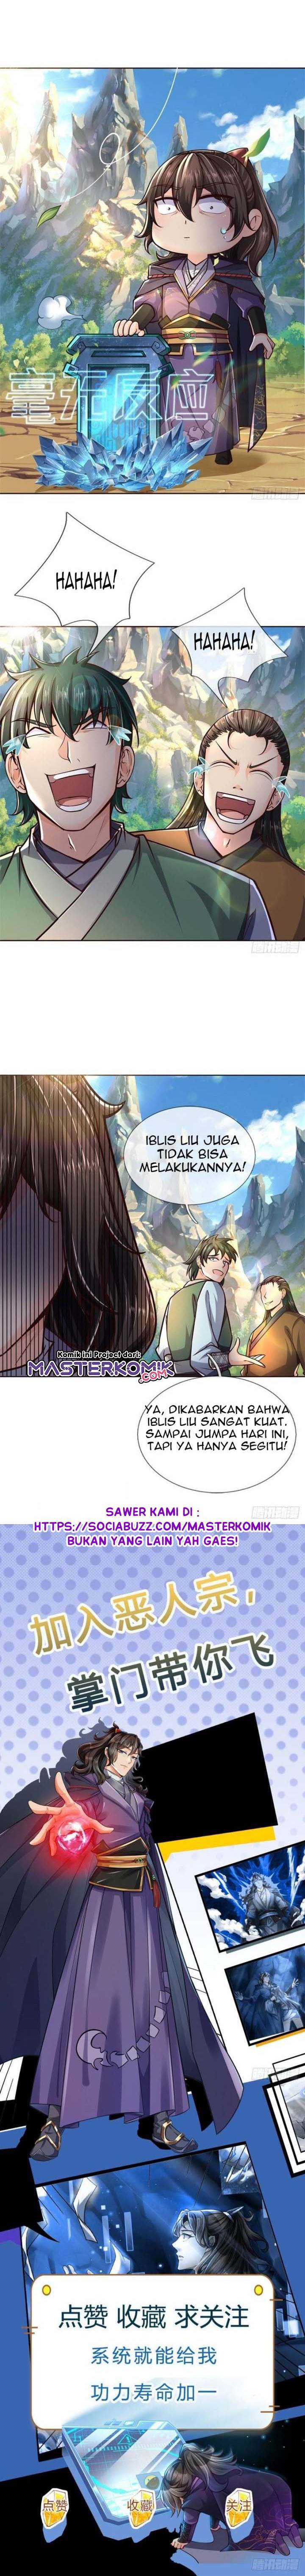 The Way Of Domination Chapter 90